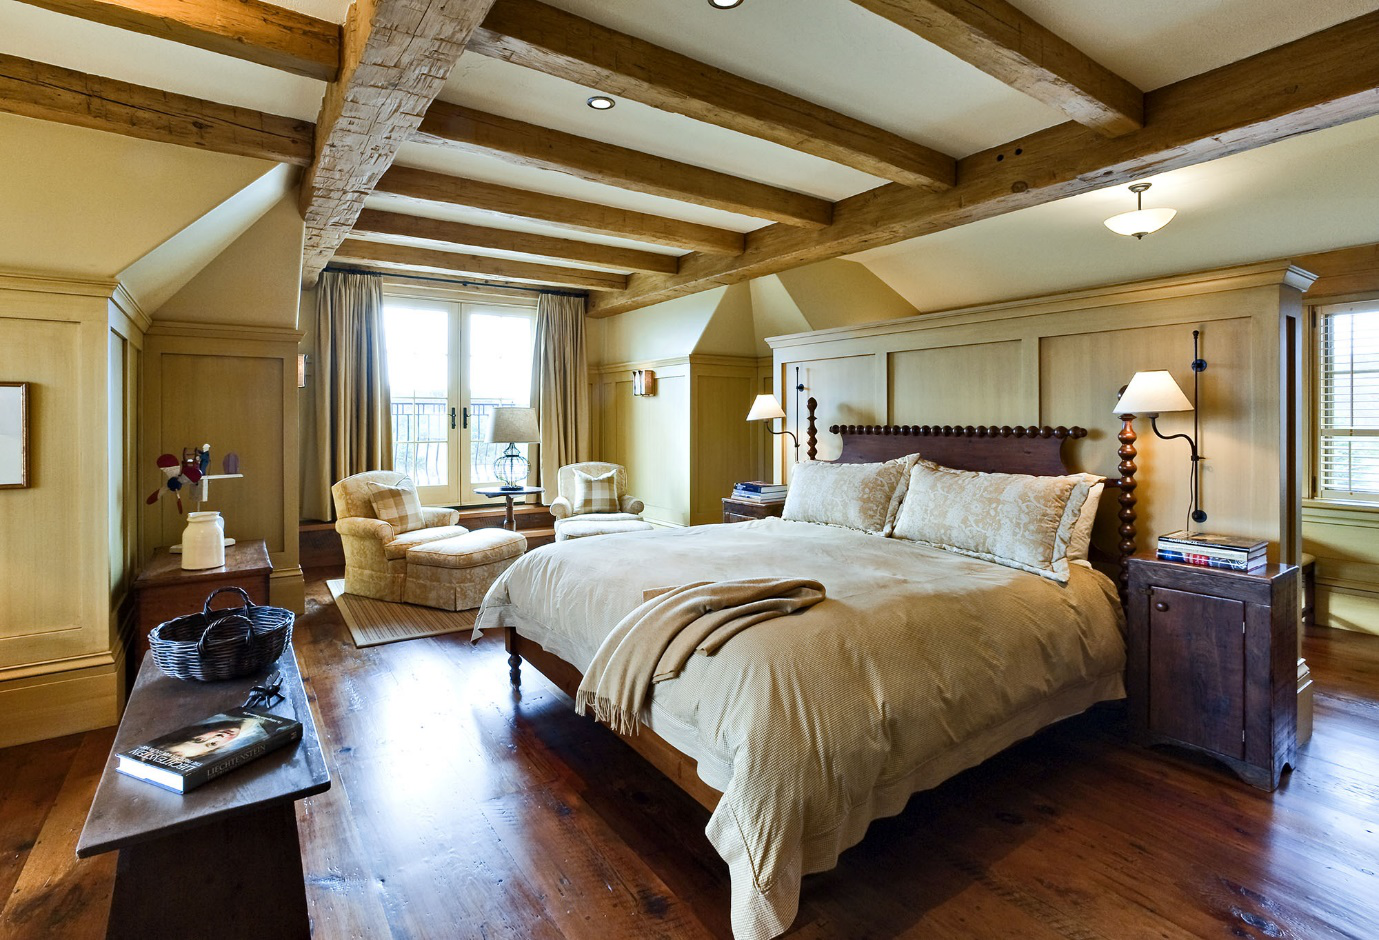  cream-colored themed bedroom with wooden floor